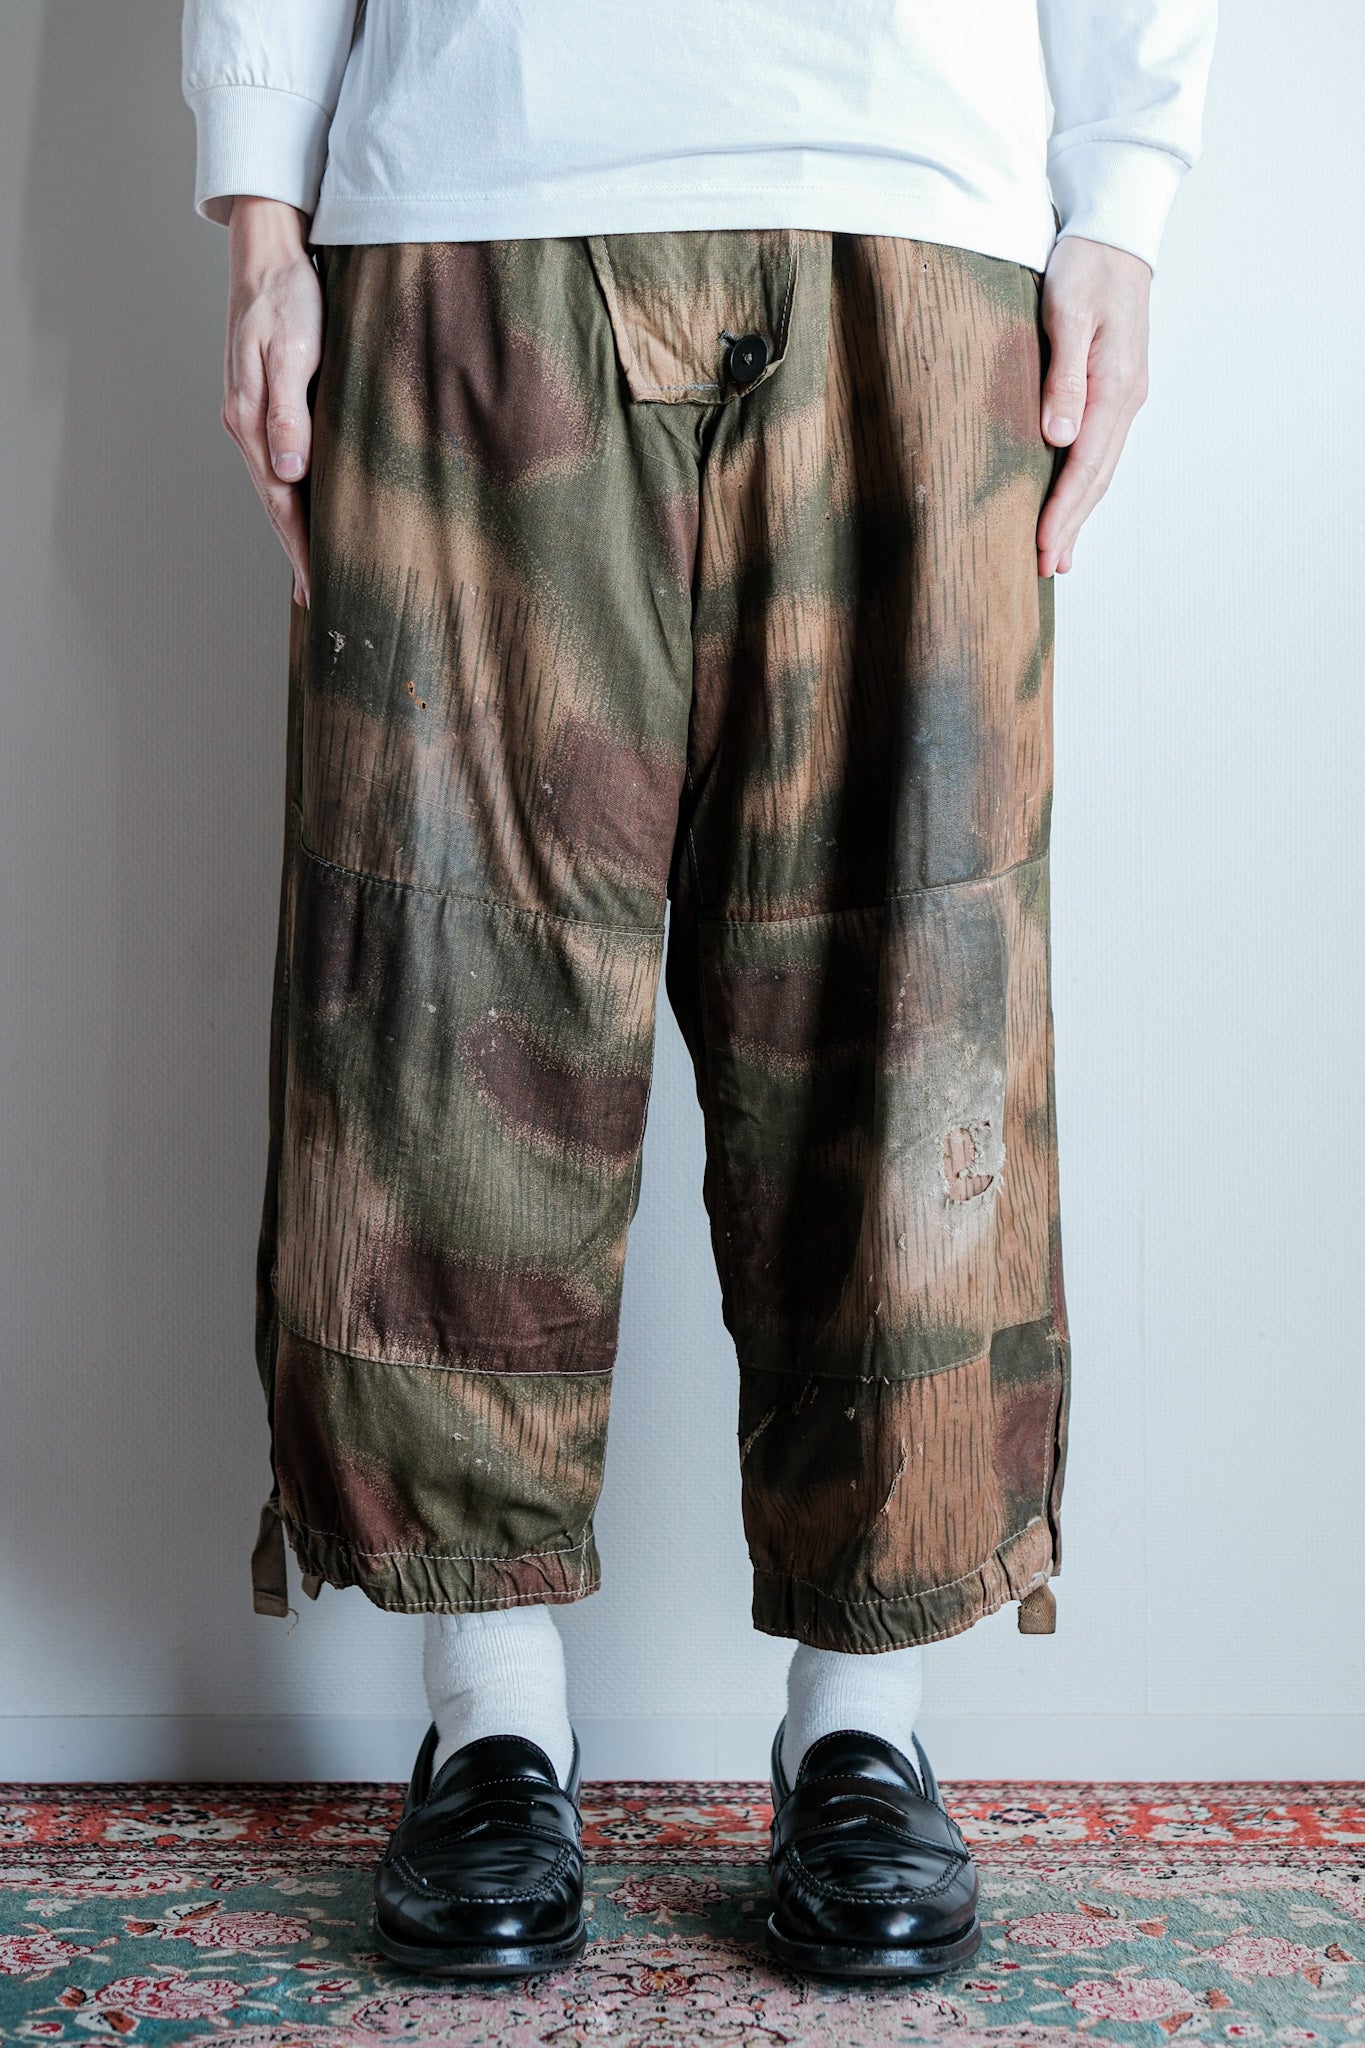 [~ 40's] WWⅱ Army allemand Sumpfternmster 44 Camouflage 43 pantalon d'hiver motif "wehrmacht"